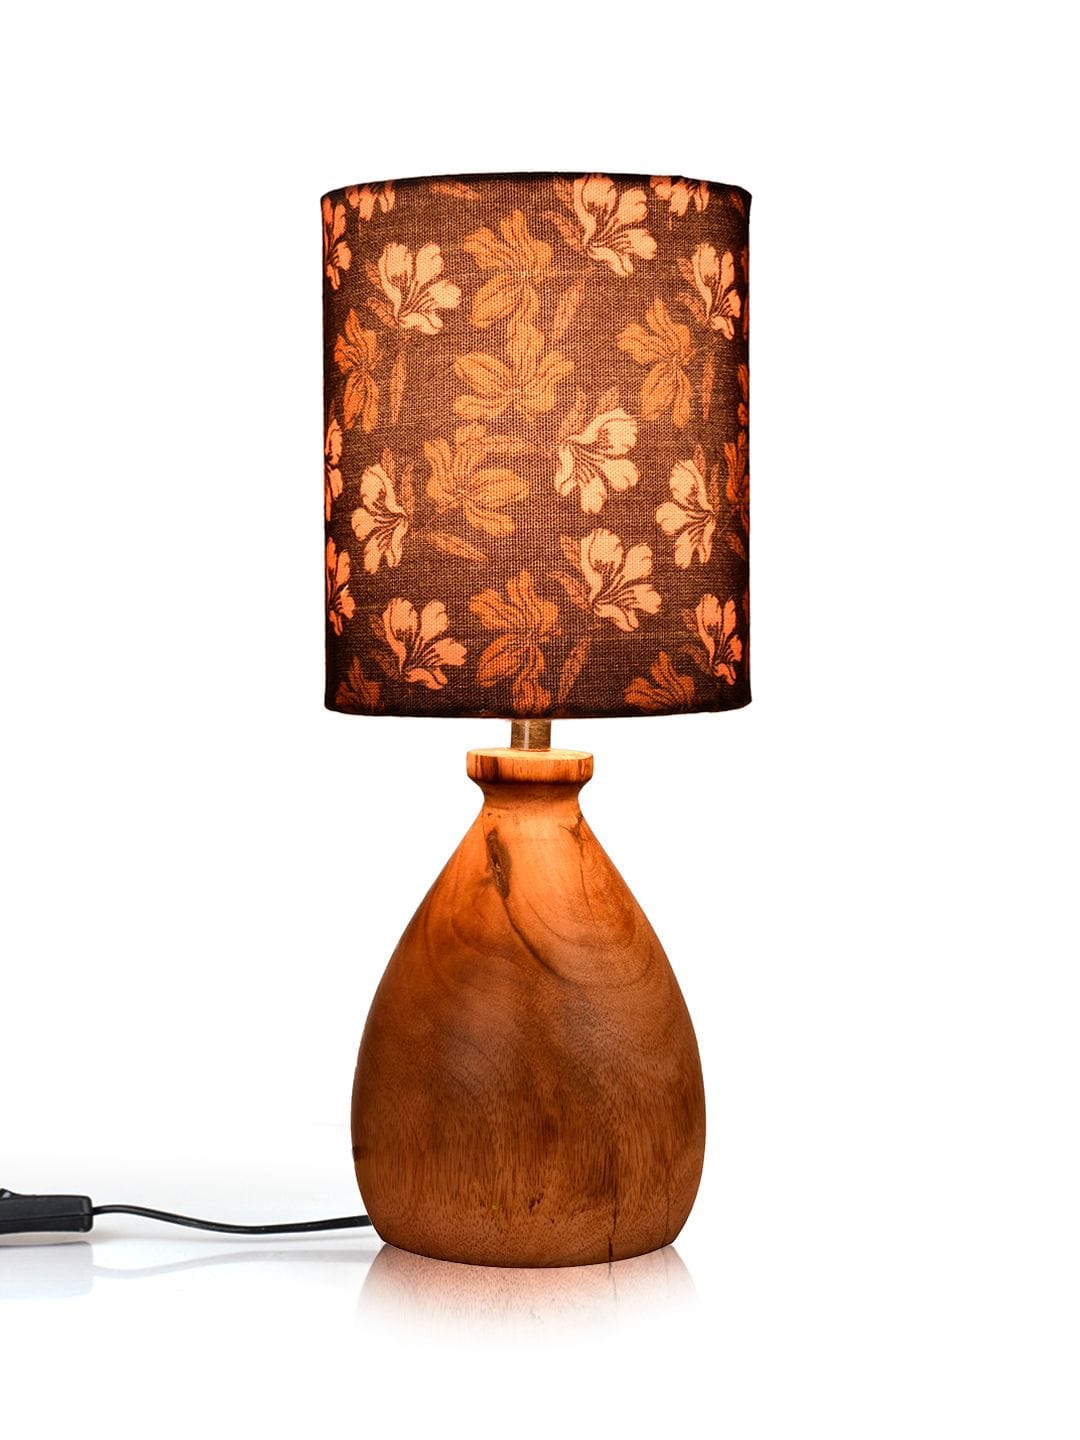 Wooden Dome Table Lamp Black Floral Shade